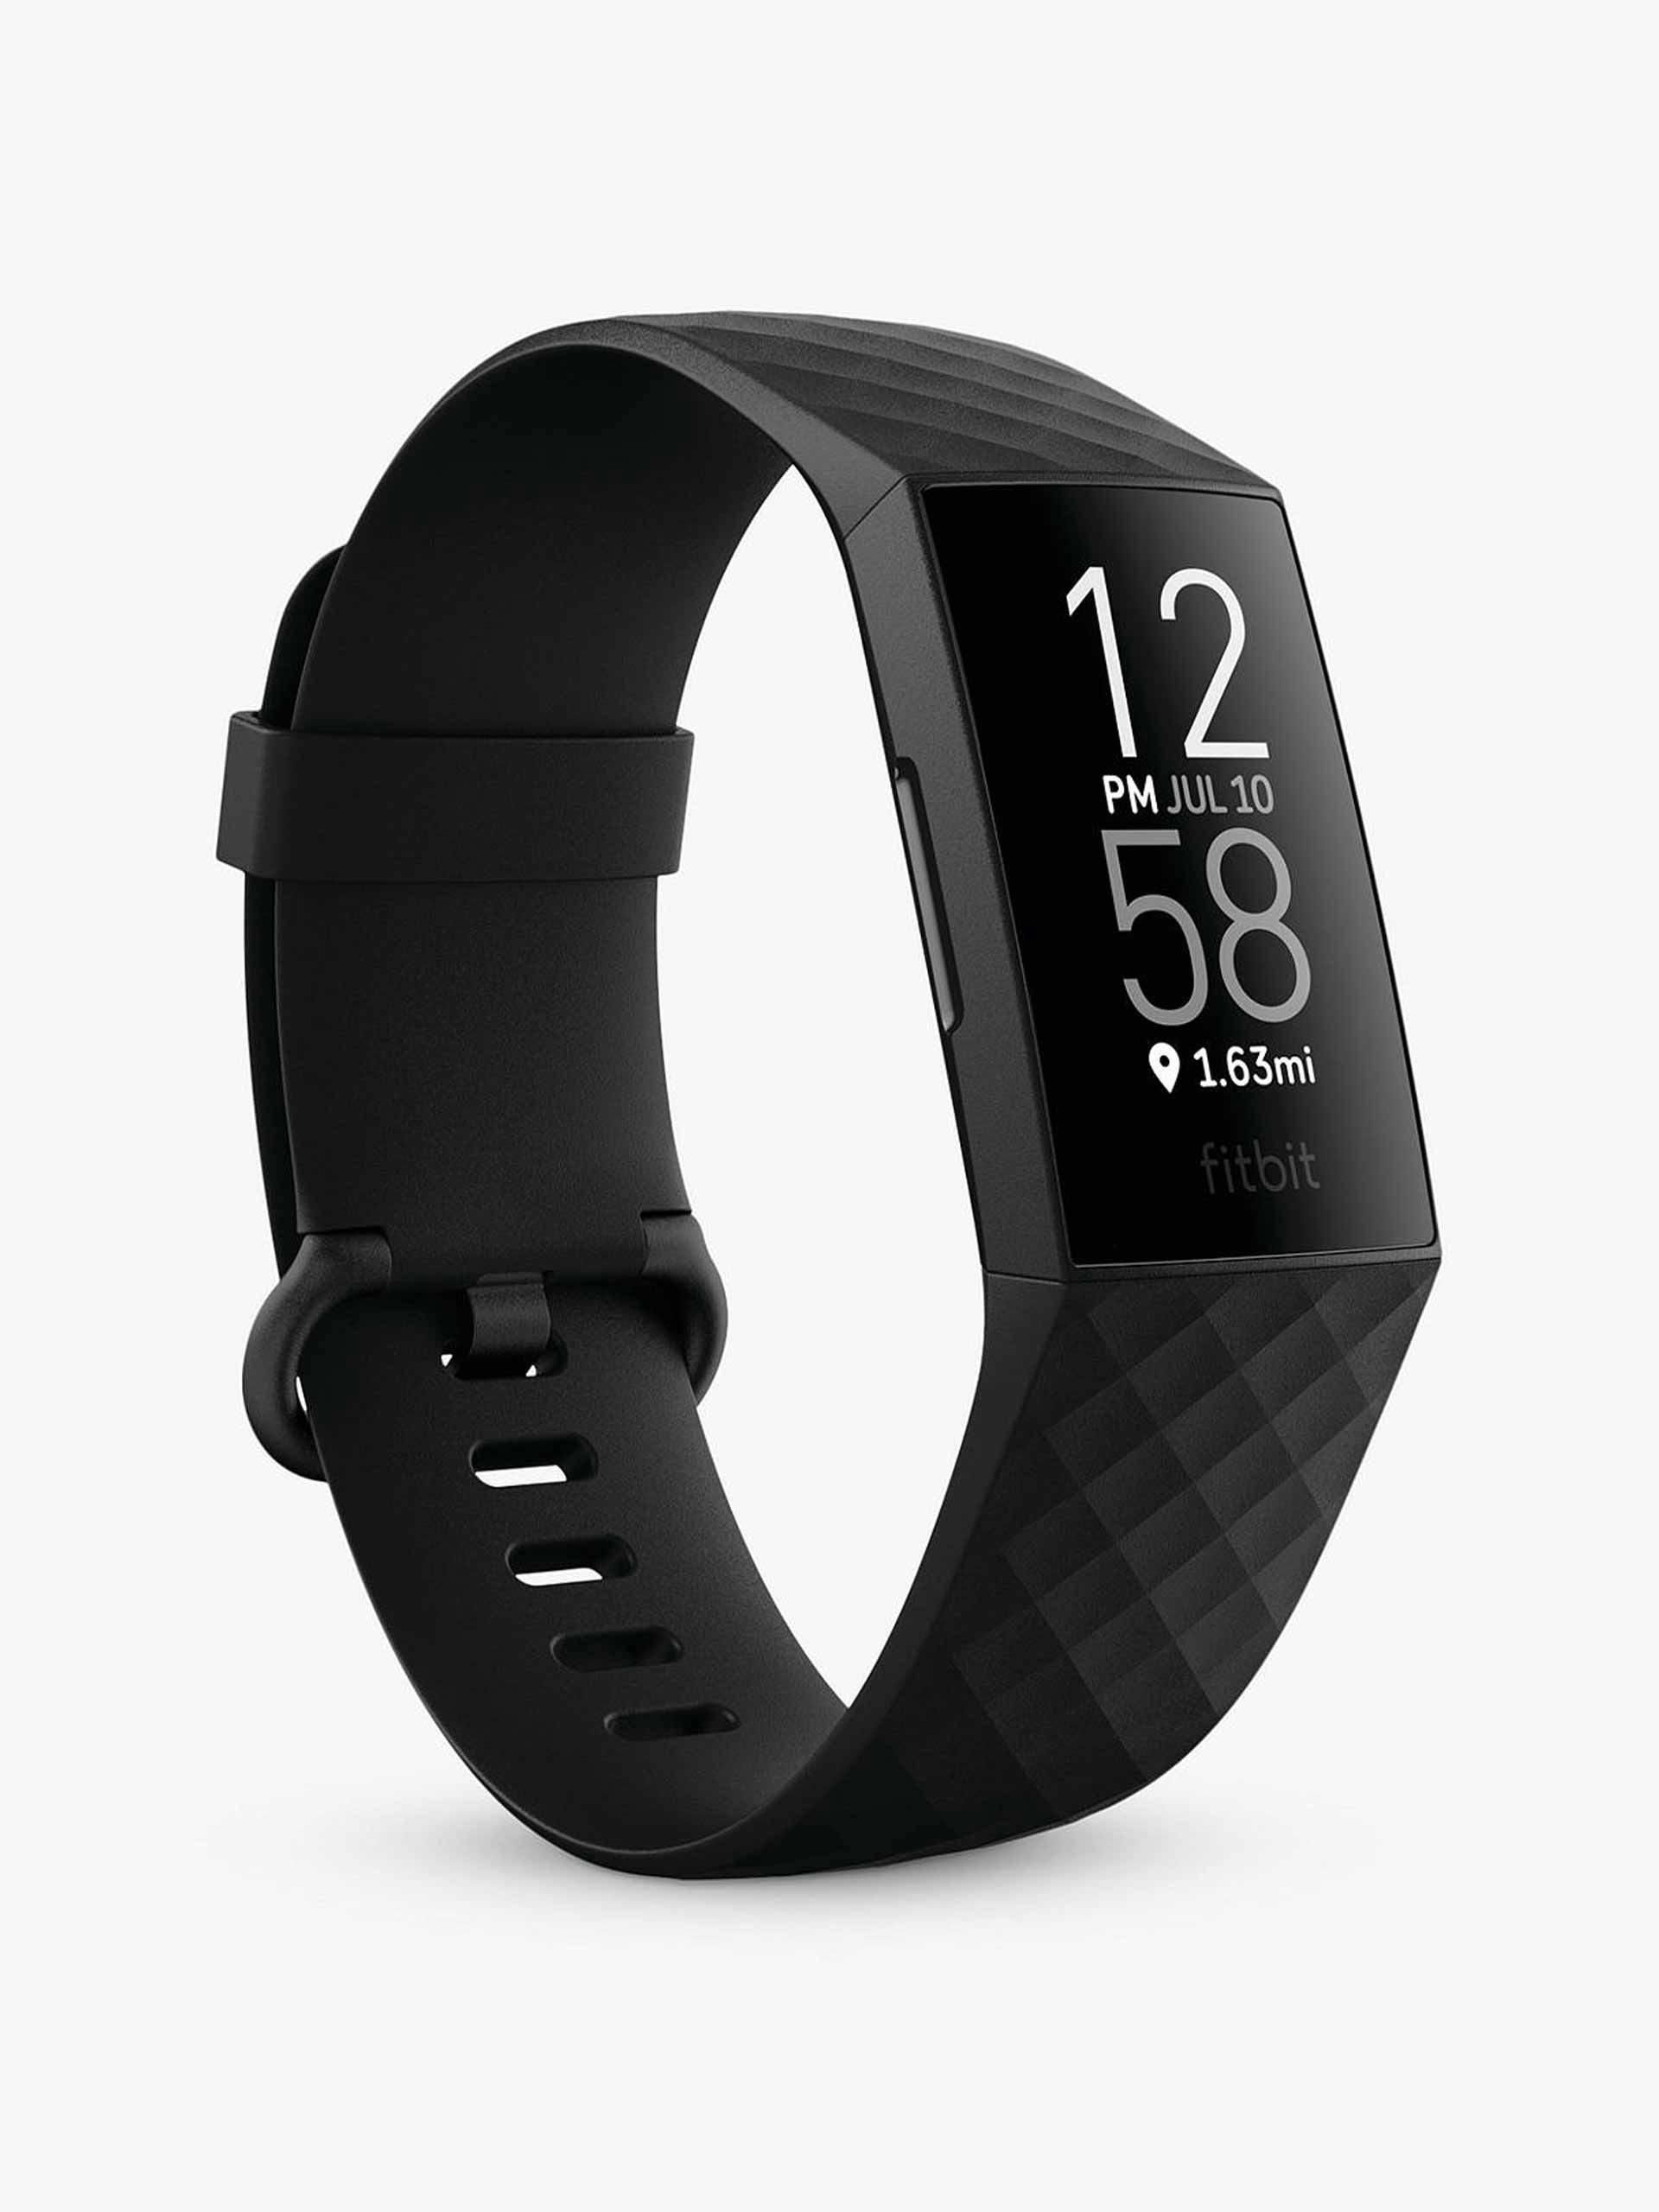 Black health and fitness tracker watch